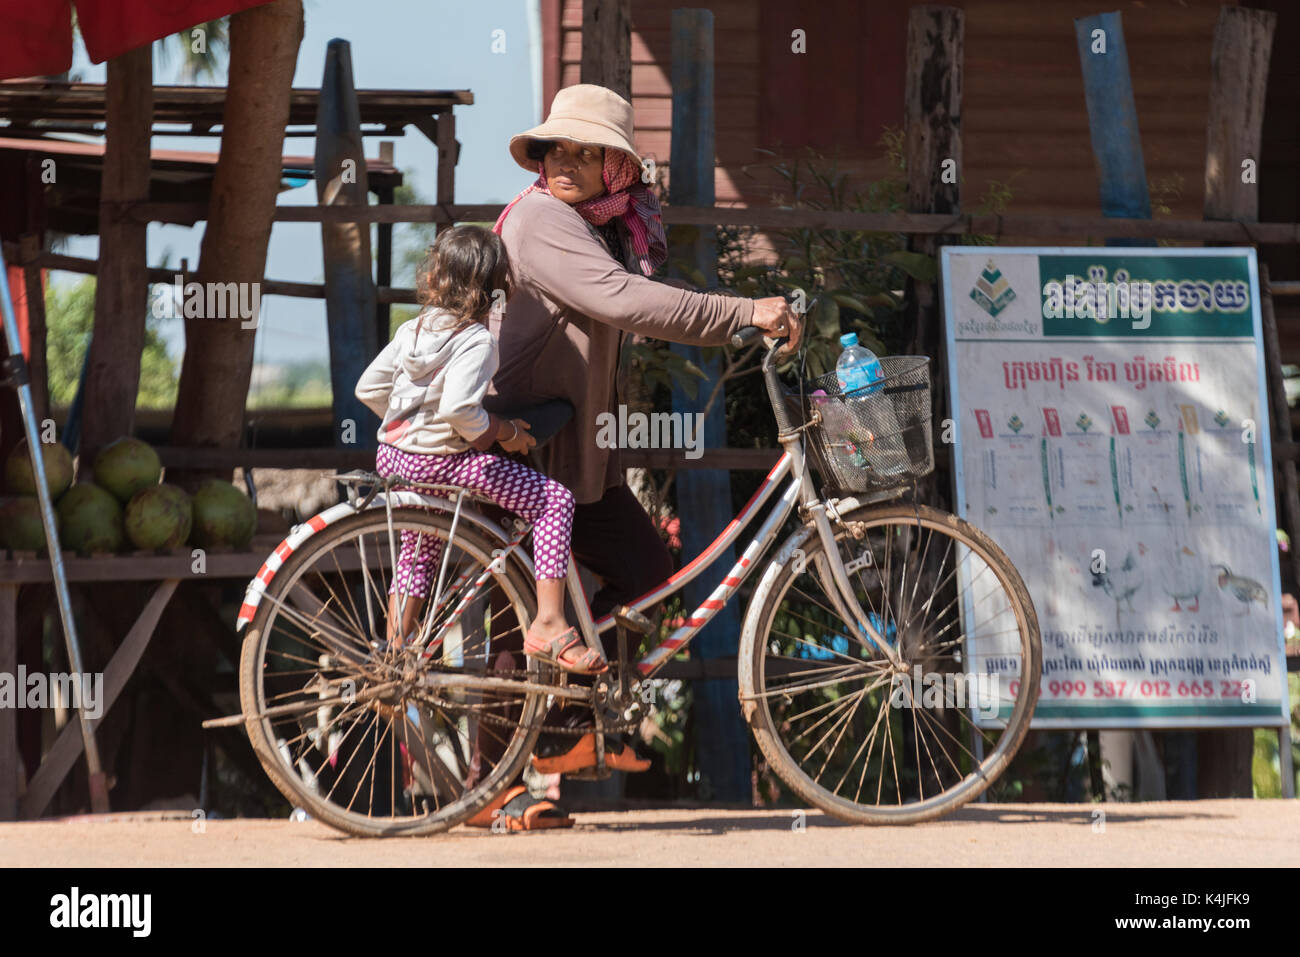 Woman with her daughter on bicycle, Siem Reap, Cambodia Stock Photo